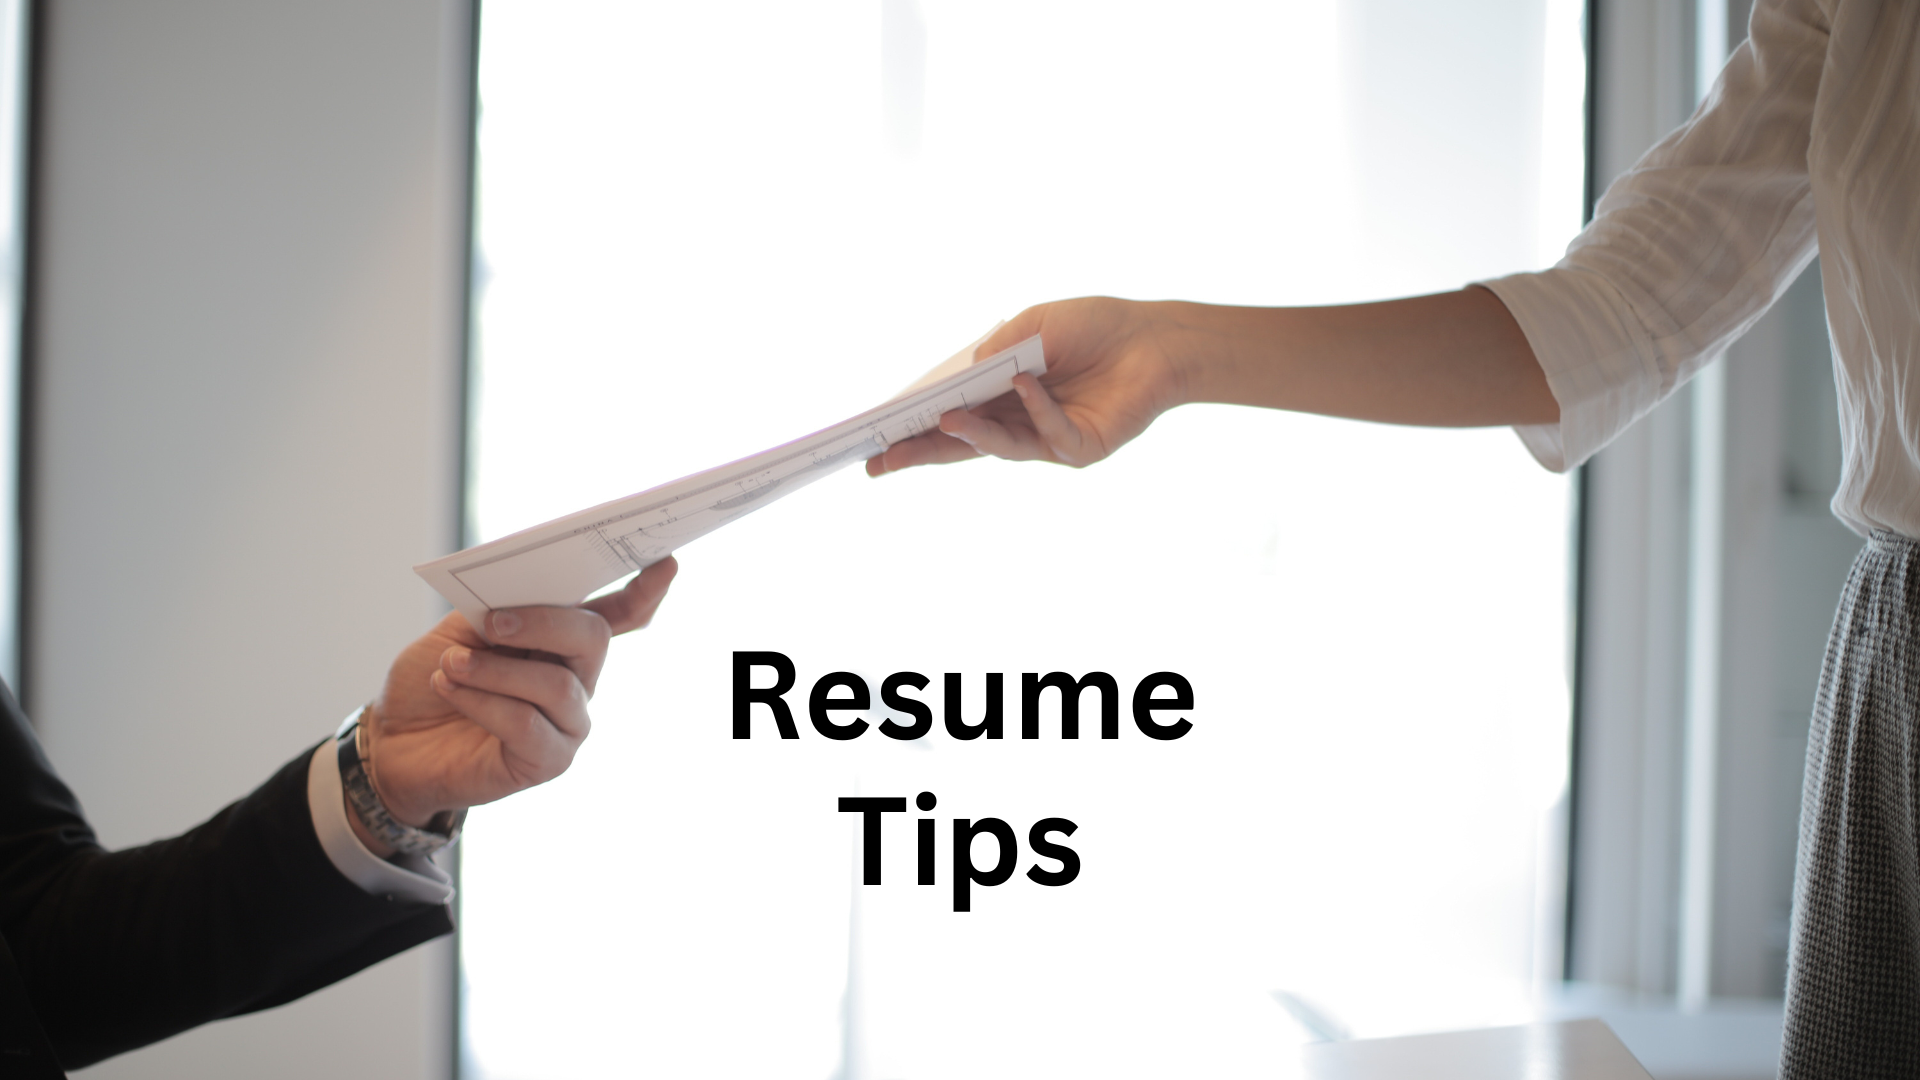 Should You Put References on a Resume?